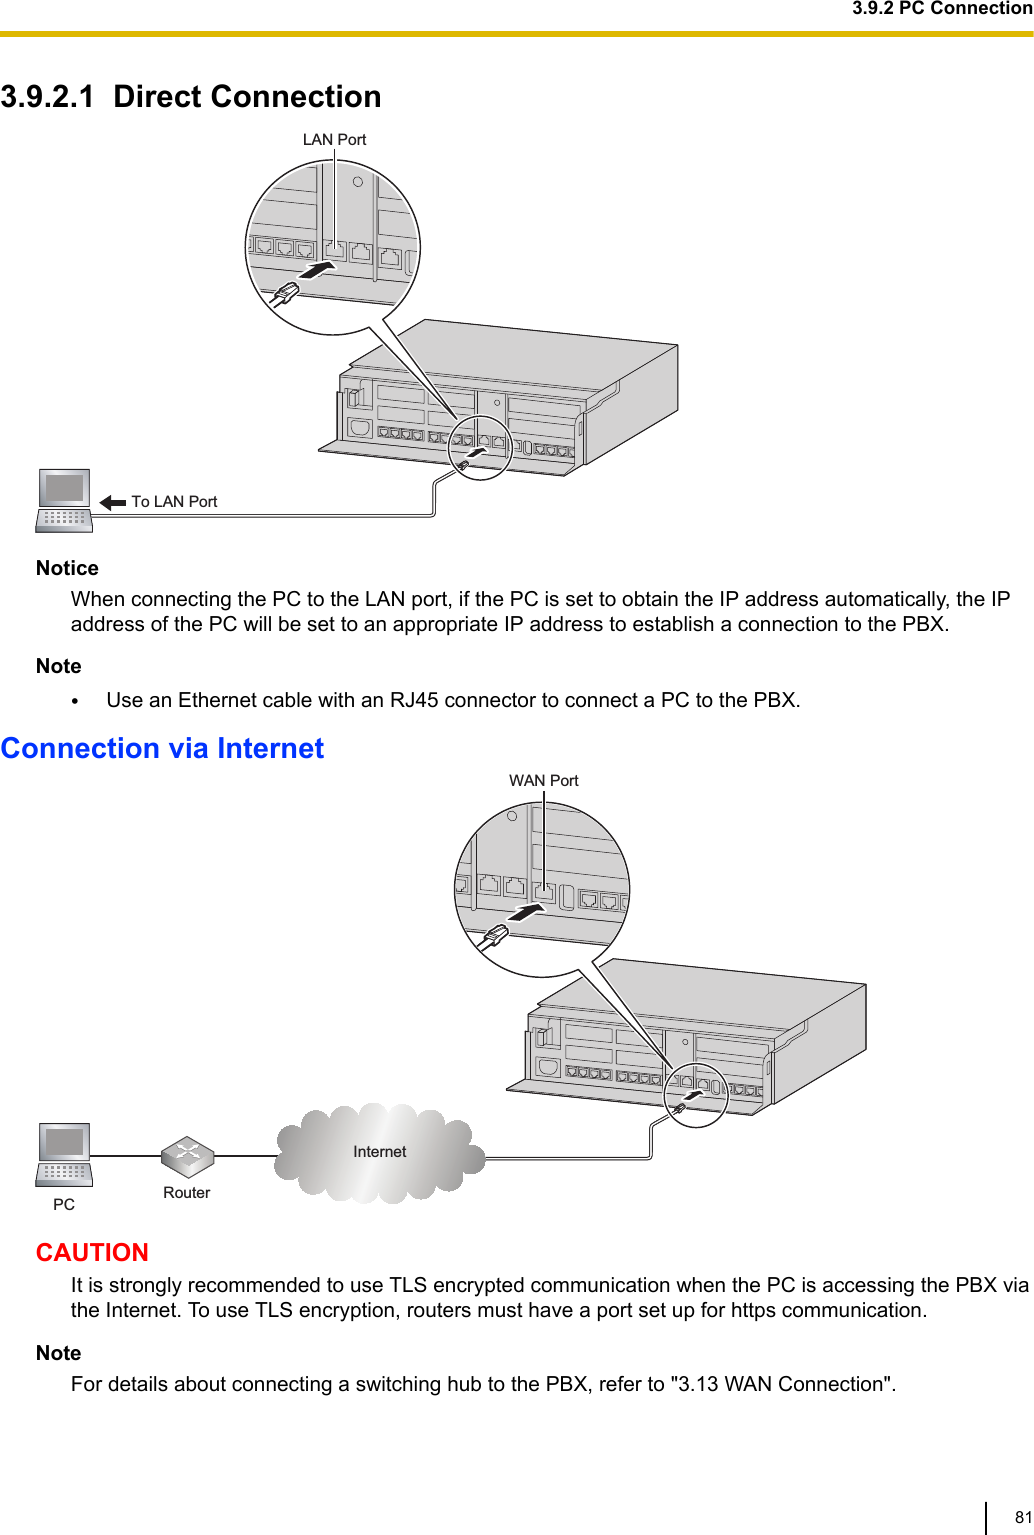 3.9.2.1  Direct ConnectionTo LAN PortLAN PortNoticeWhen connecting the PC to the LAN port, if the PC is set to obtain the IP address automatically, the IPaddress of the PC will be set to an appropriate IP address to establish a connection to the PBX.Note•Use an Ethernet cable with an RJ45 connector to connect a PC to the PBX.Connection via InternetRouterInternetPCWAN PortCAUTIONIt is strongly recommended to use TLS encrypted communication when the PC is accessing the PBX viathe Internet. To use TLS encryption, routers must have a port set up for https communication.NoteFor details about connecting a switching hub to the PBX, refer to &quot;3.13 WAN Connection&quot;.3.9.2 PC Connection81